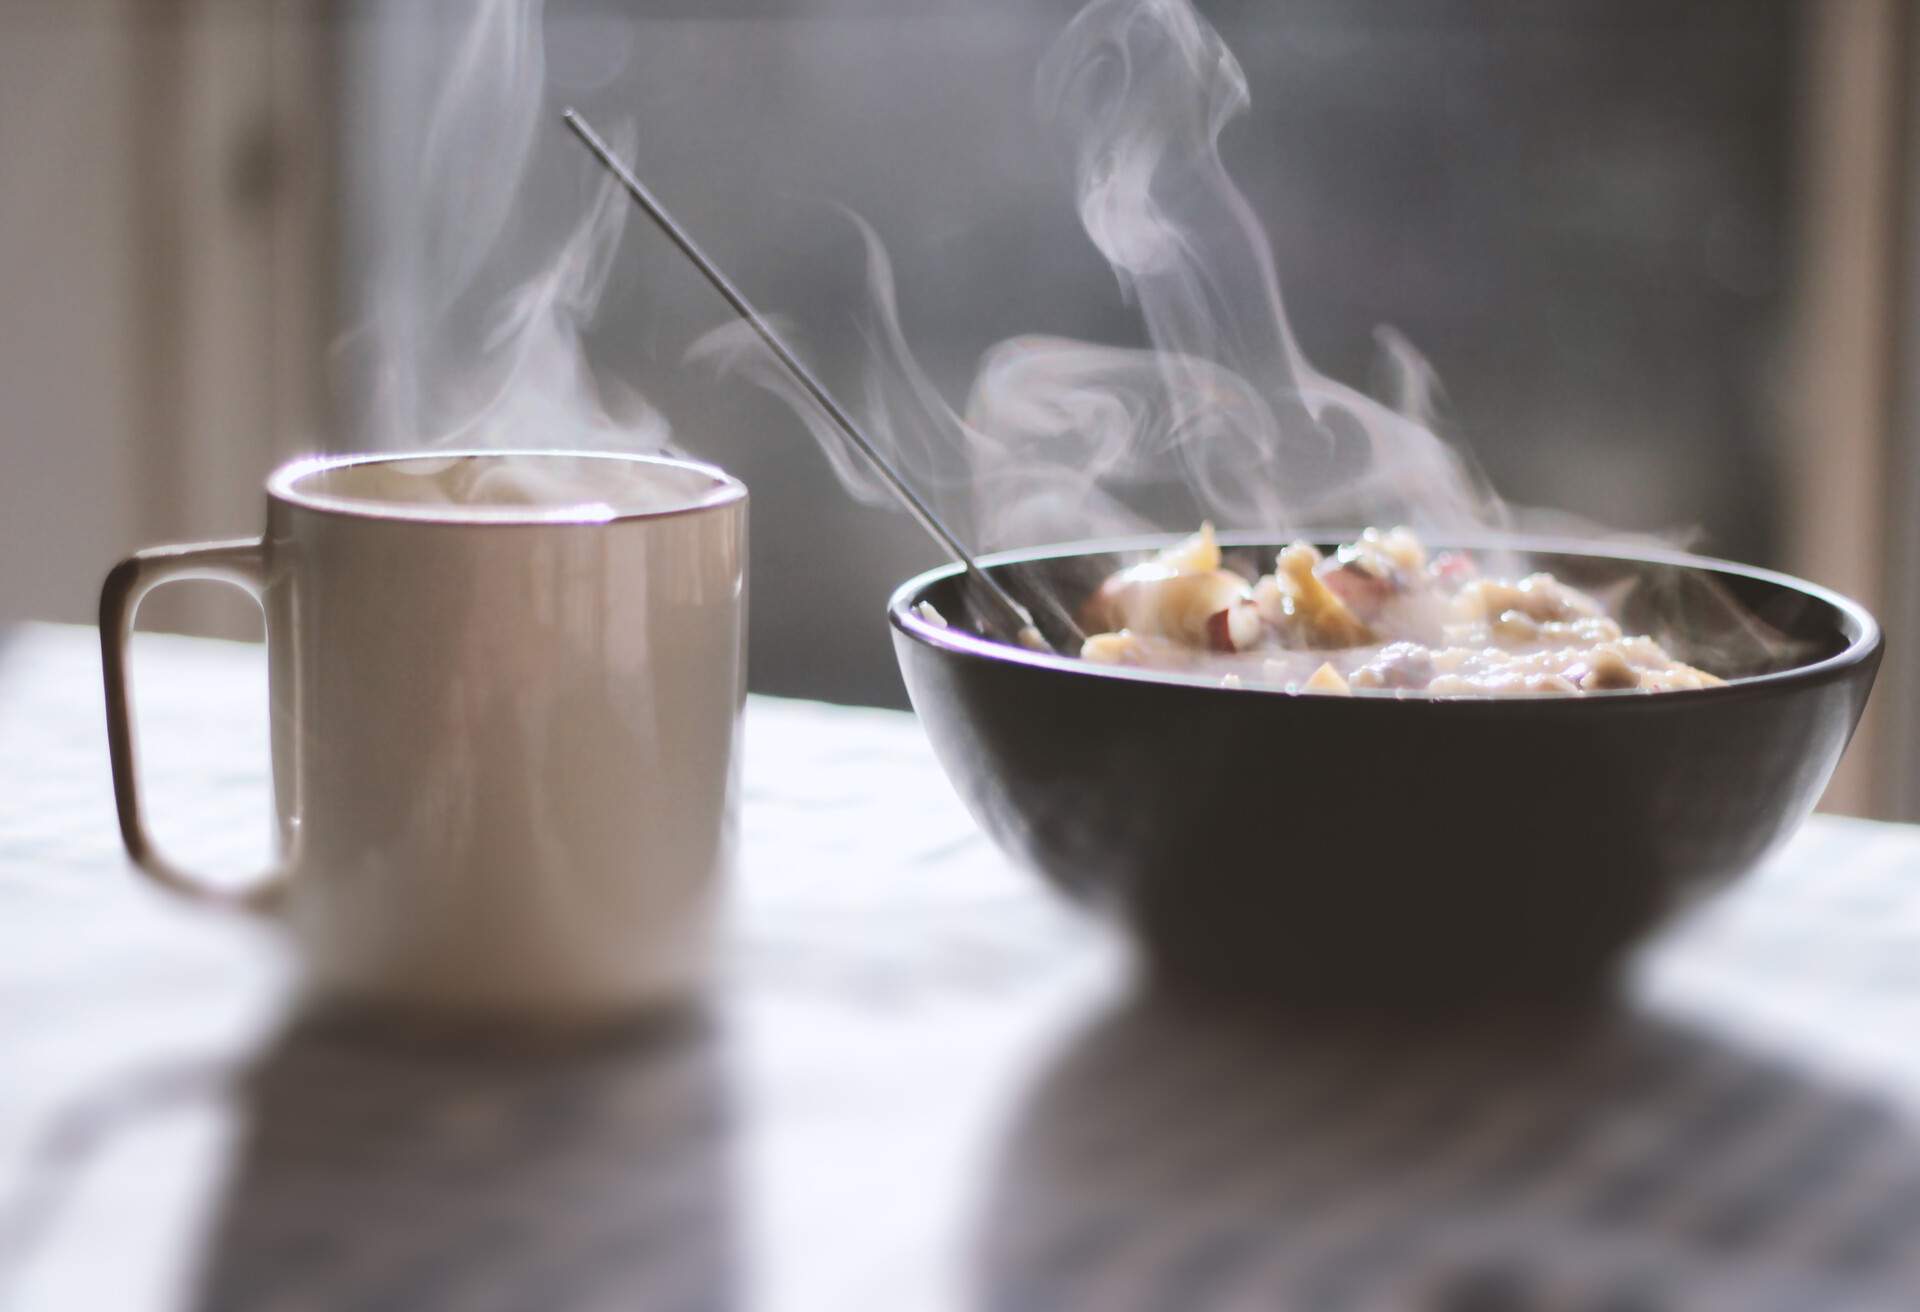 Close-up of porridge and tea served in a bowl on table with morning light and shadows coming through the window in the background.